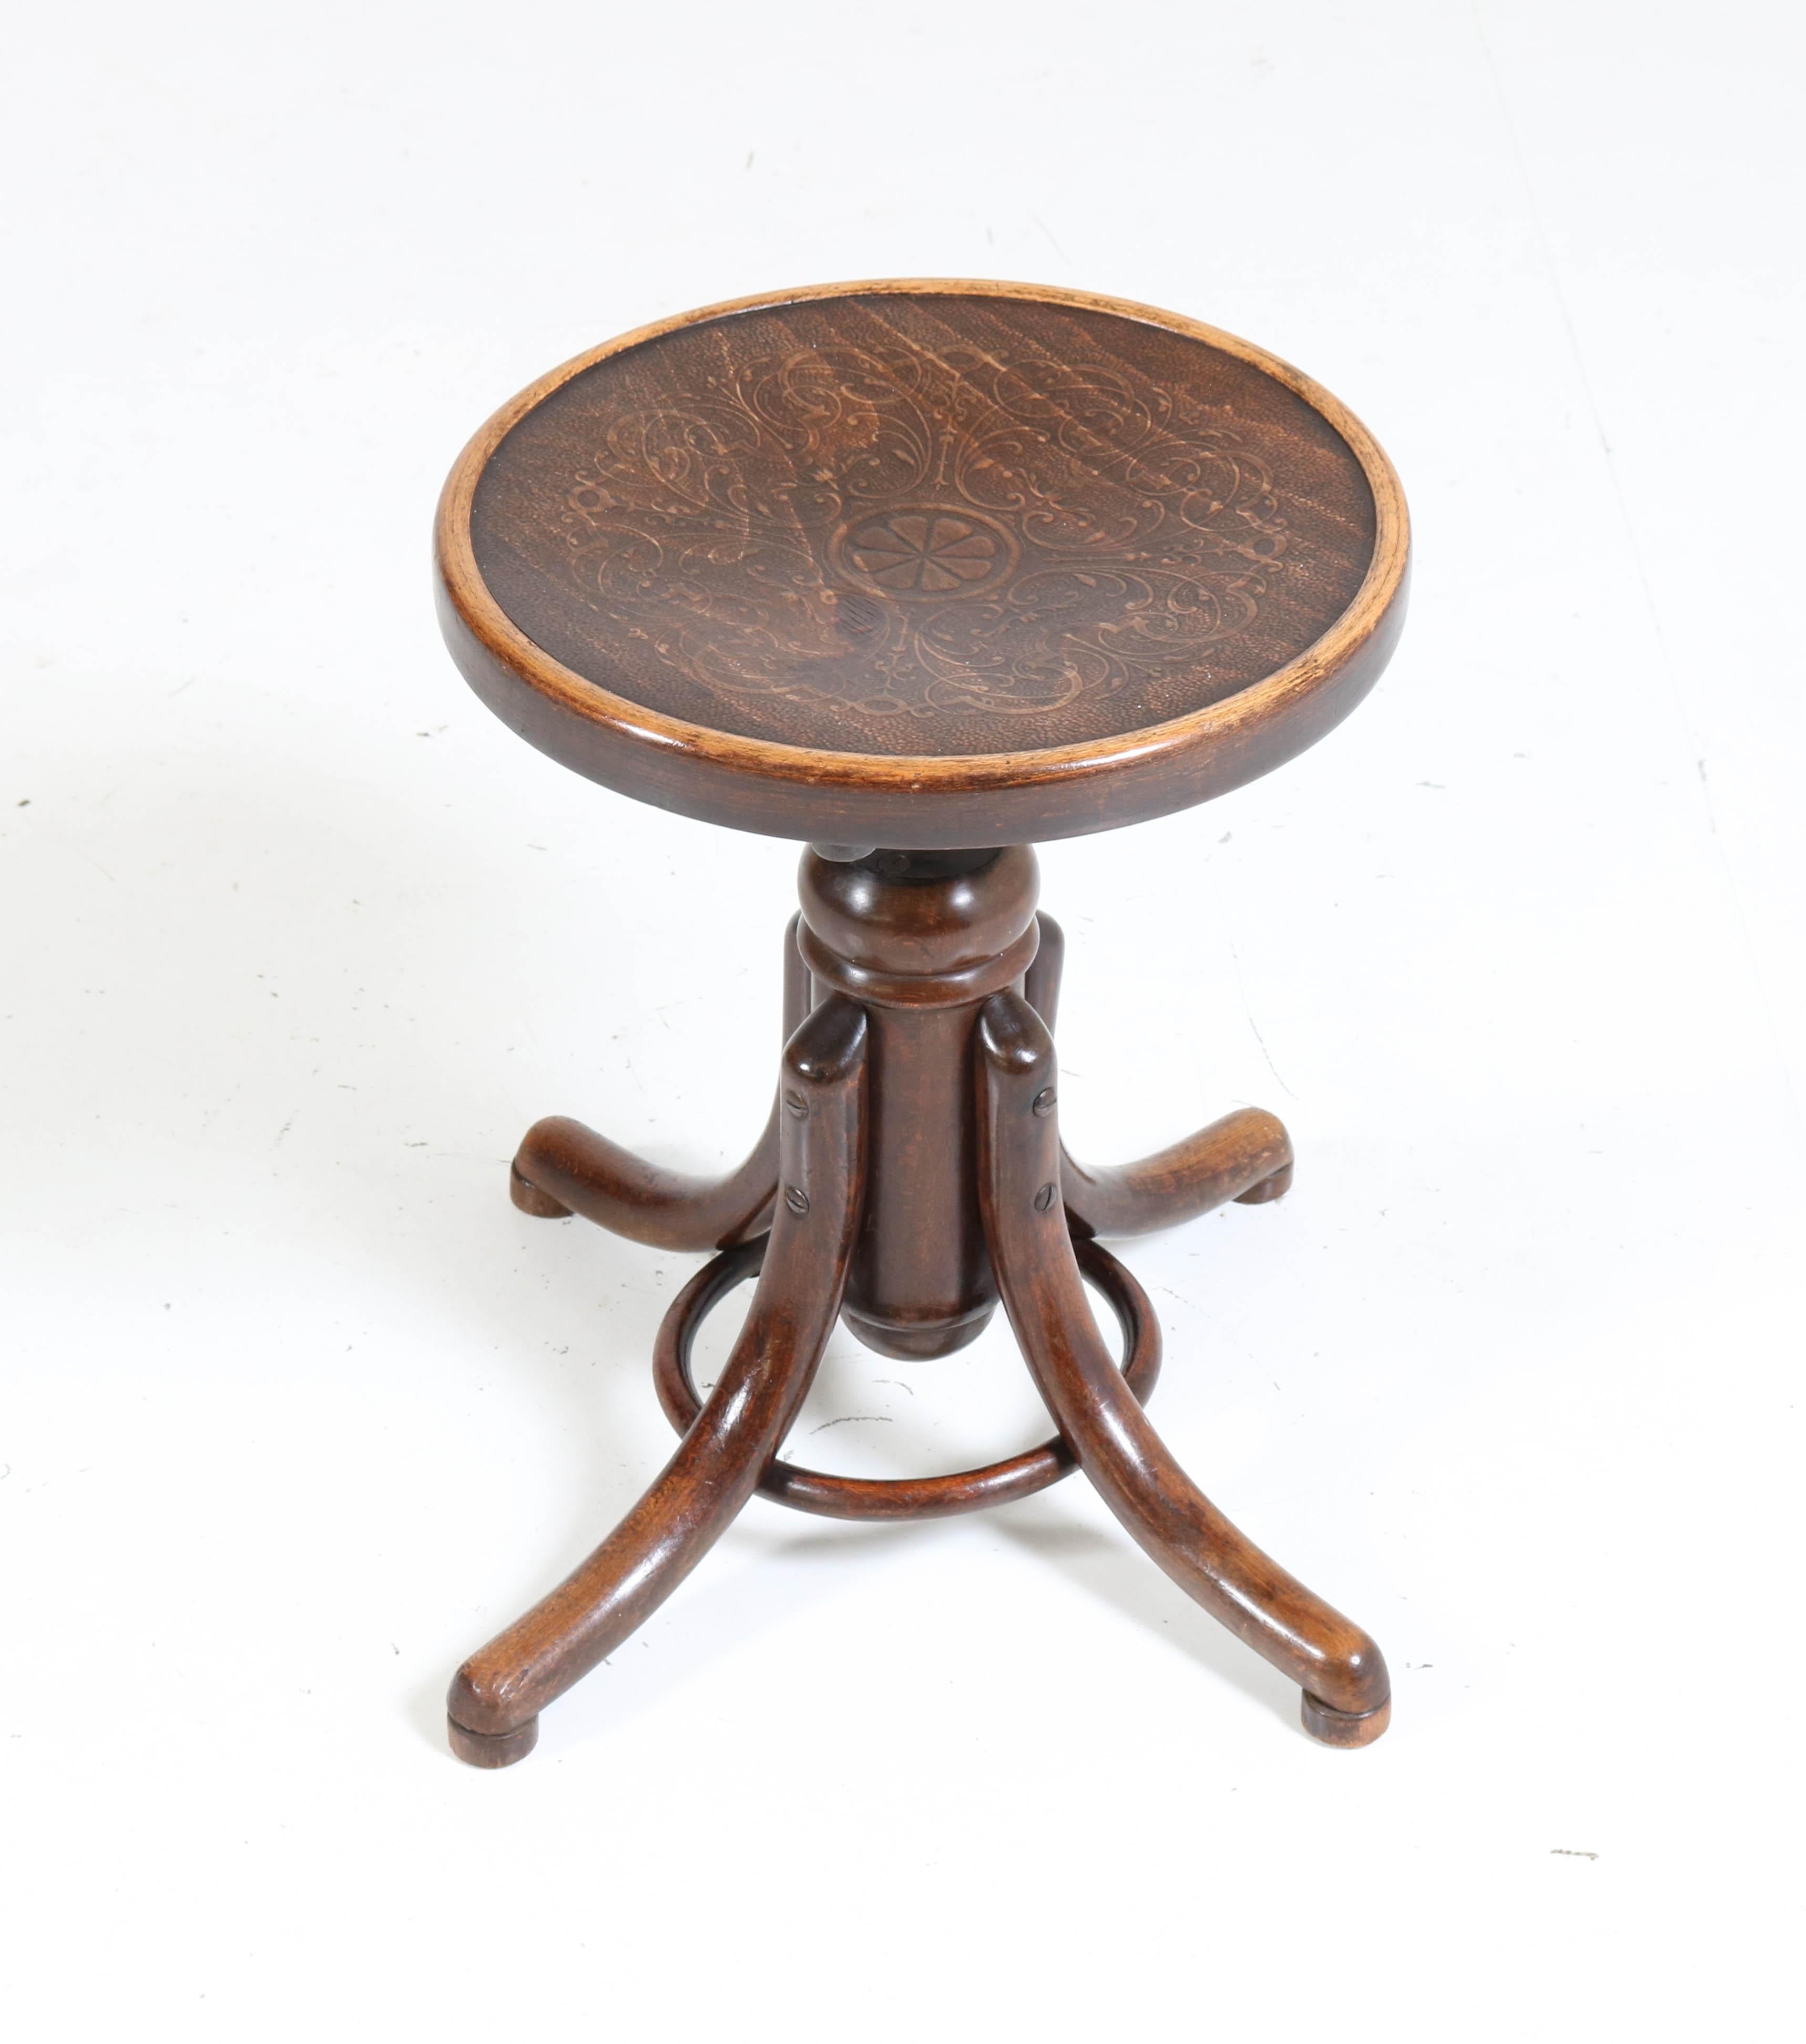 Wonderful Art Nouveau revolving stool.
Design by Thonet Austria, circa 1910.
Beech bentwood with original printed seating surface.
Adjustable in height.
In good original condition with minor wear consistent with age and wear,
preserving a